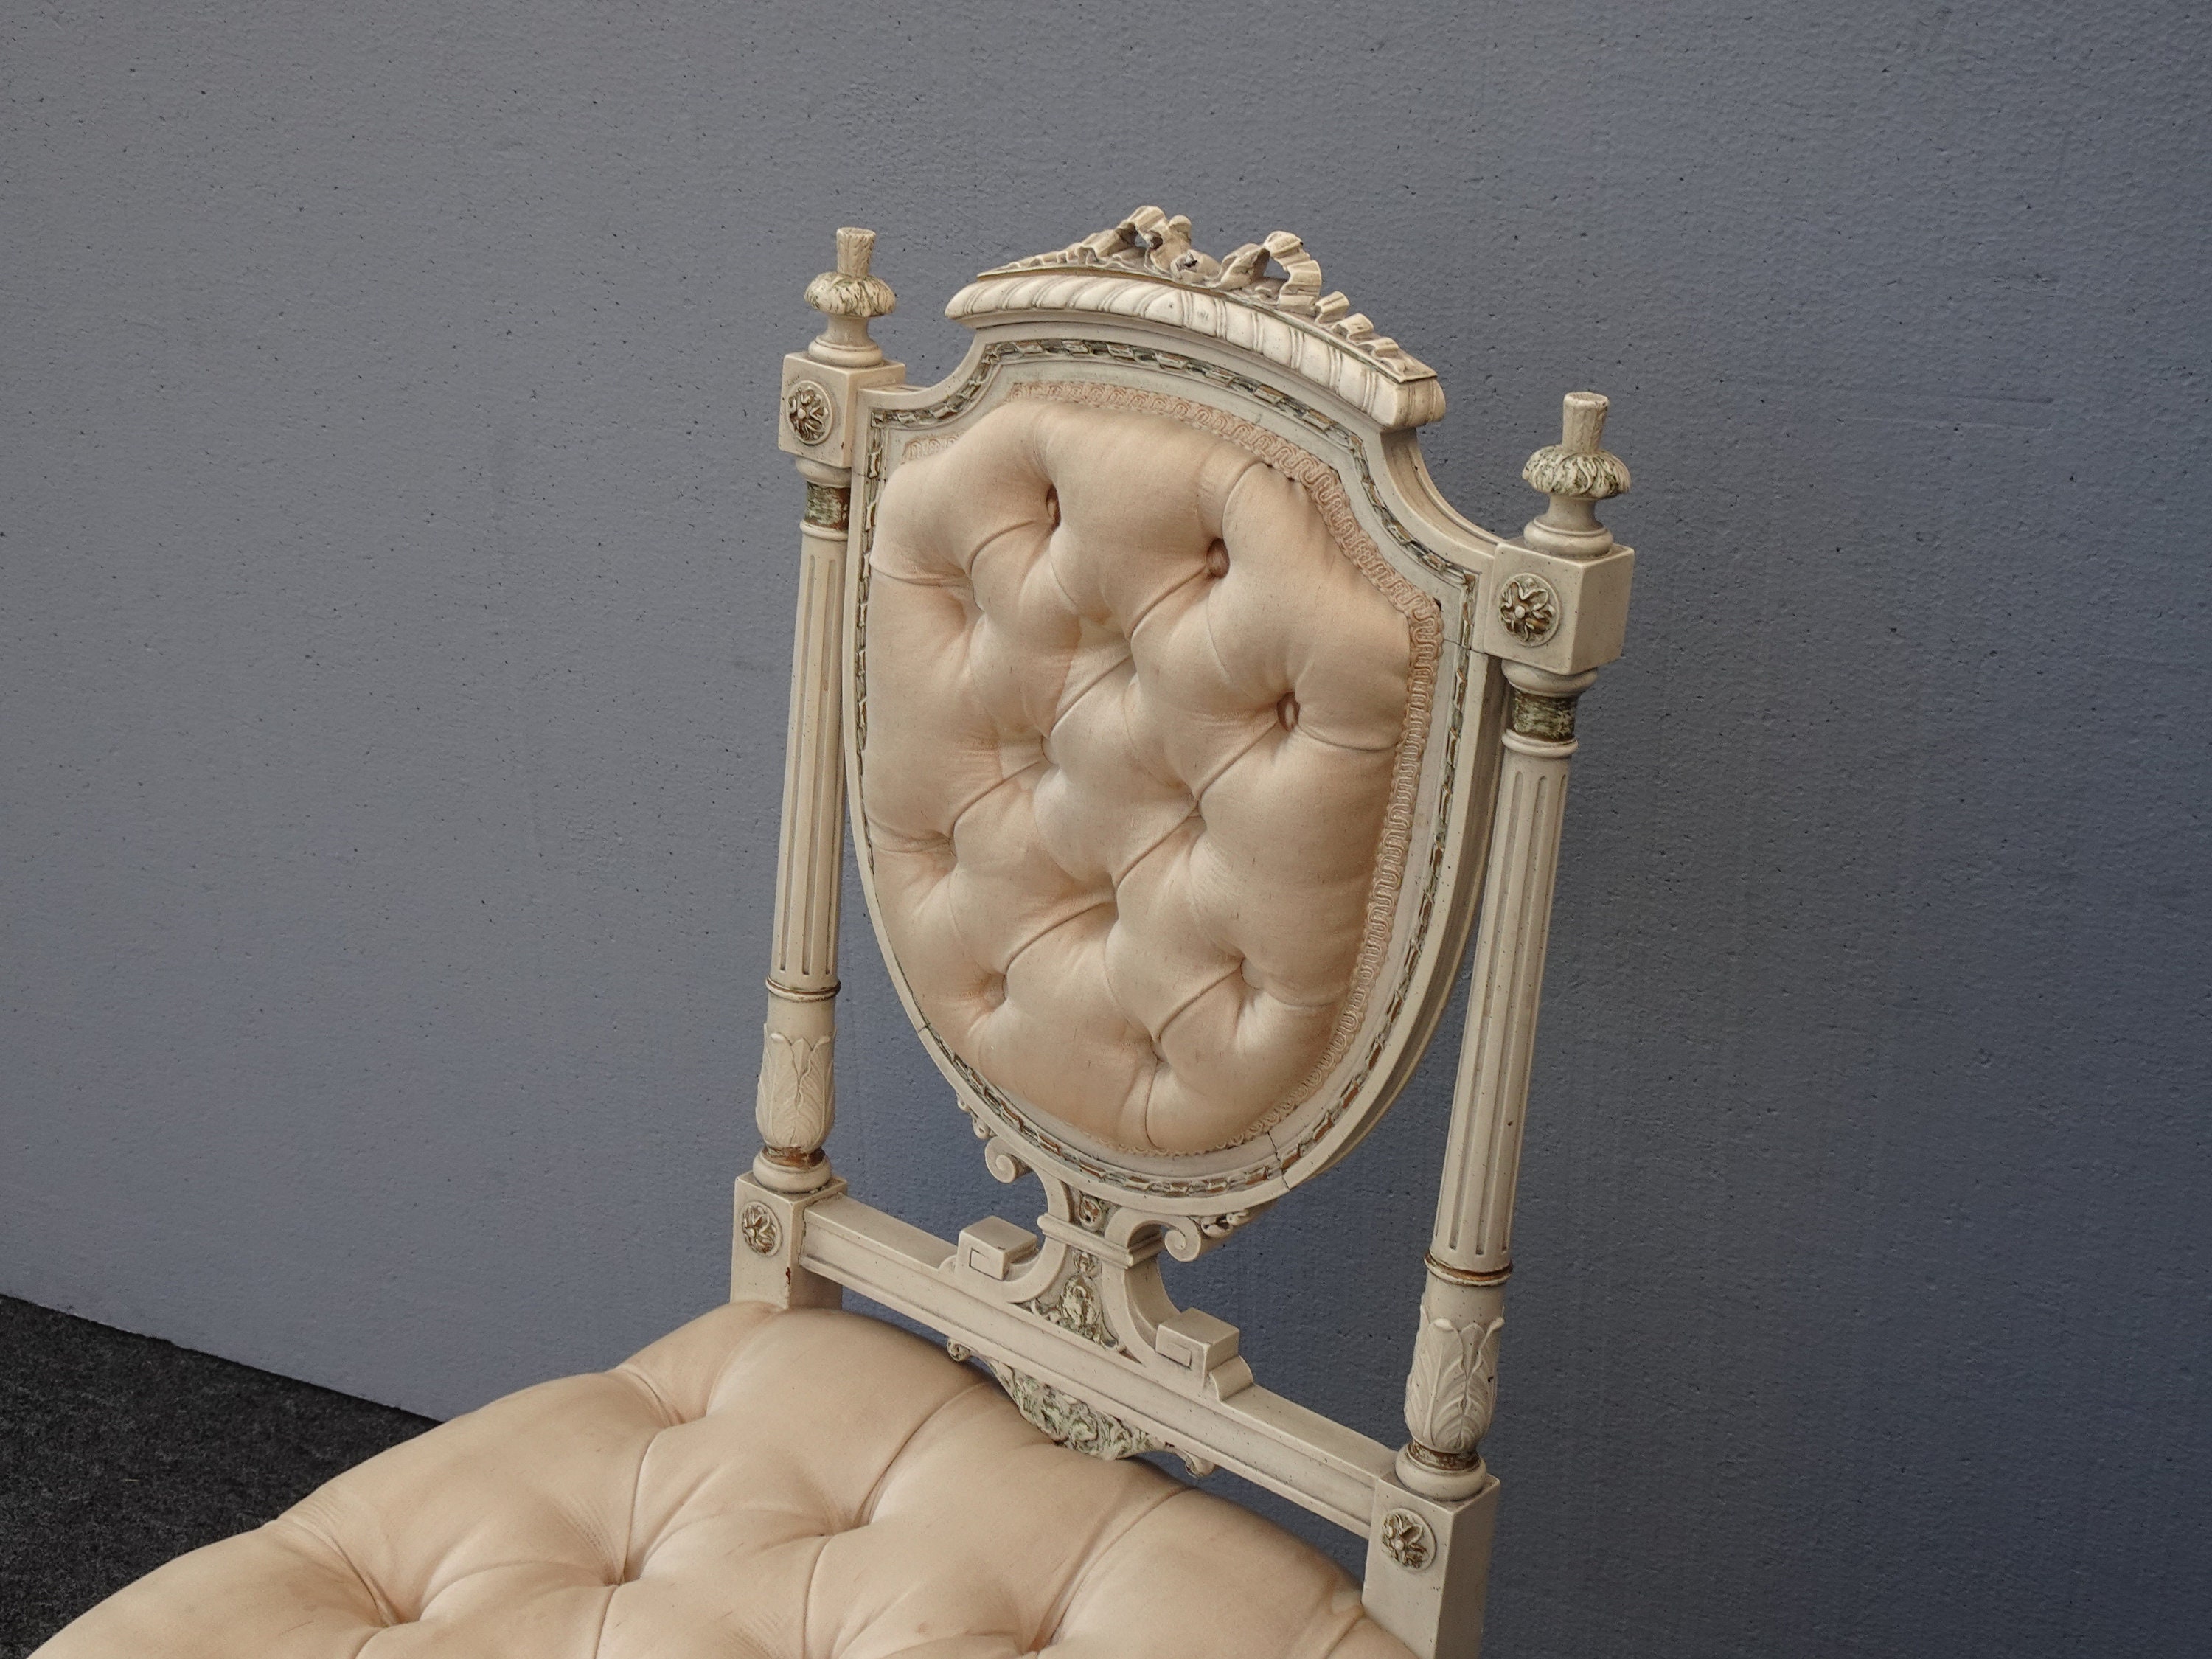 Vintage French Provincial Louis XVI Rococo Off White Heart Tufted Chair #2